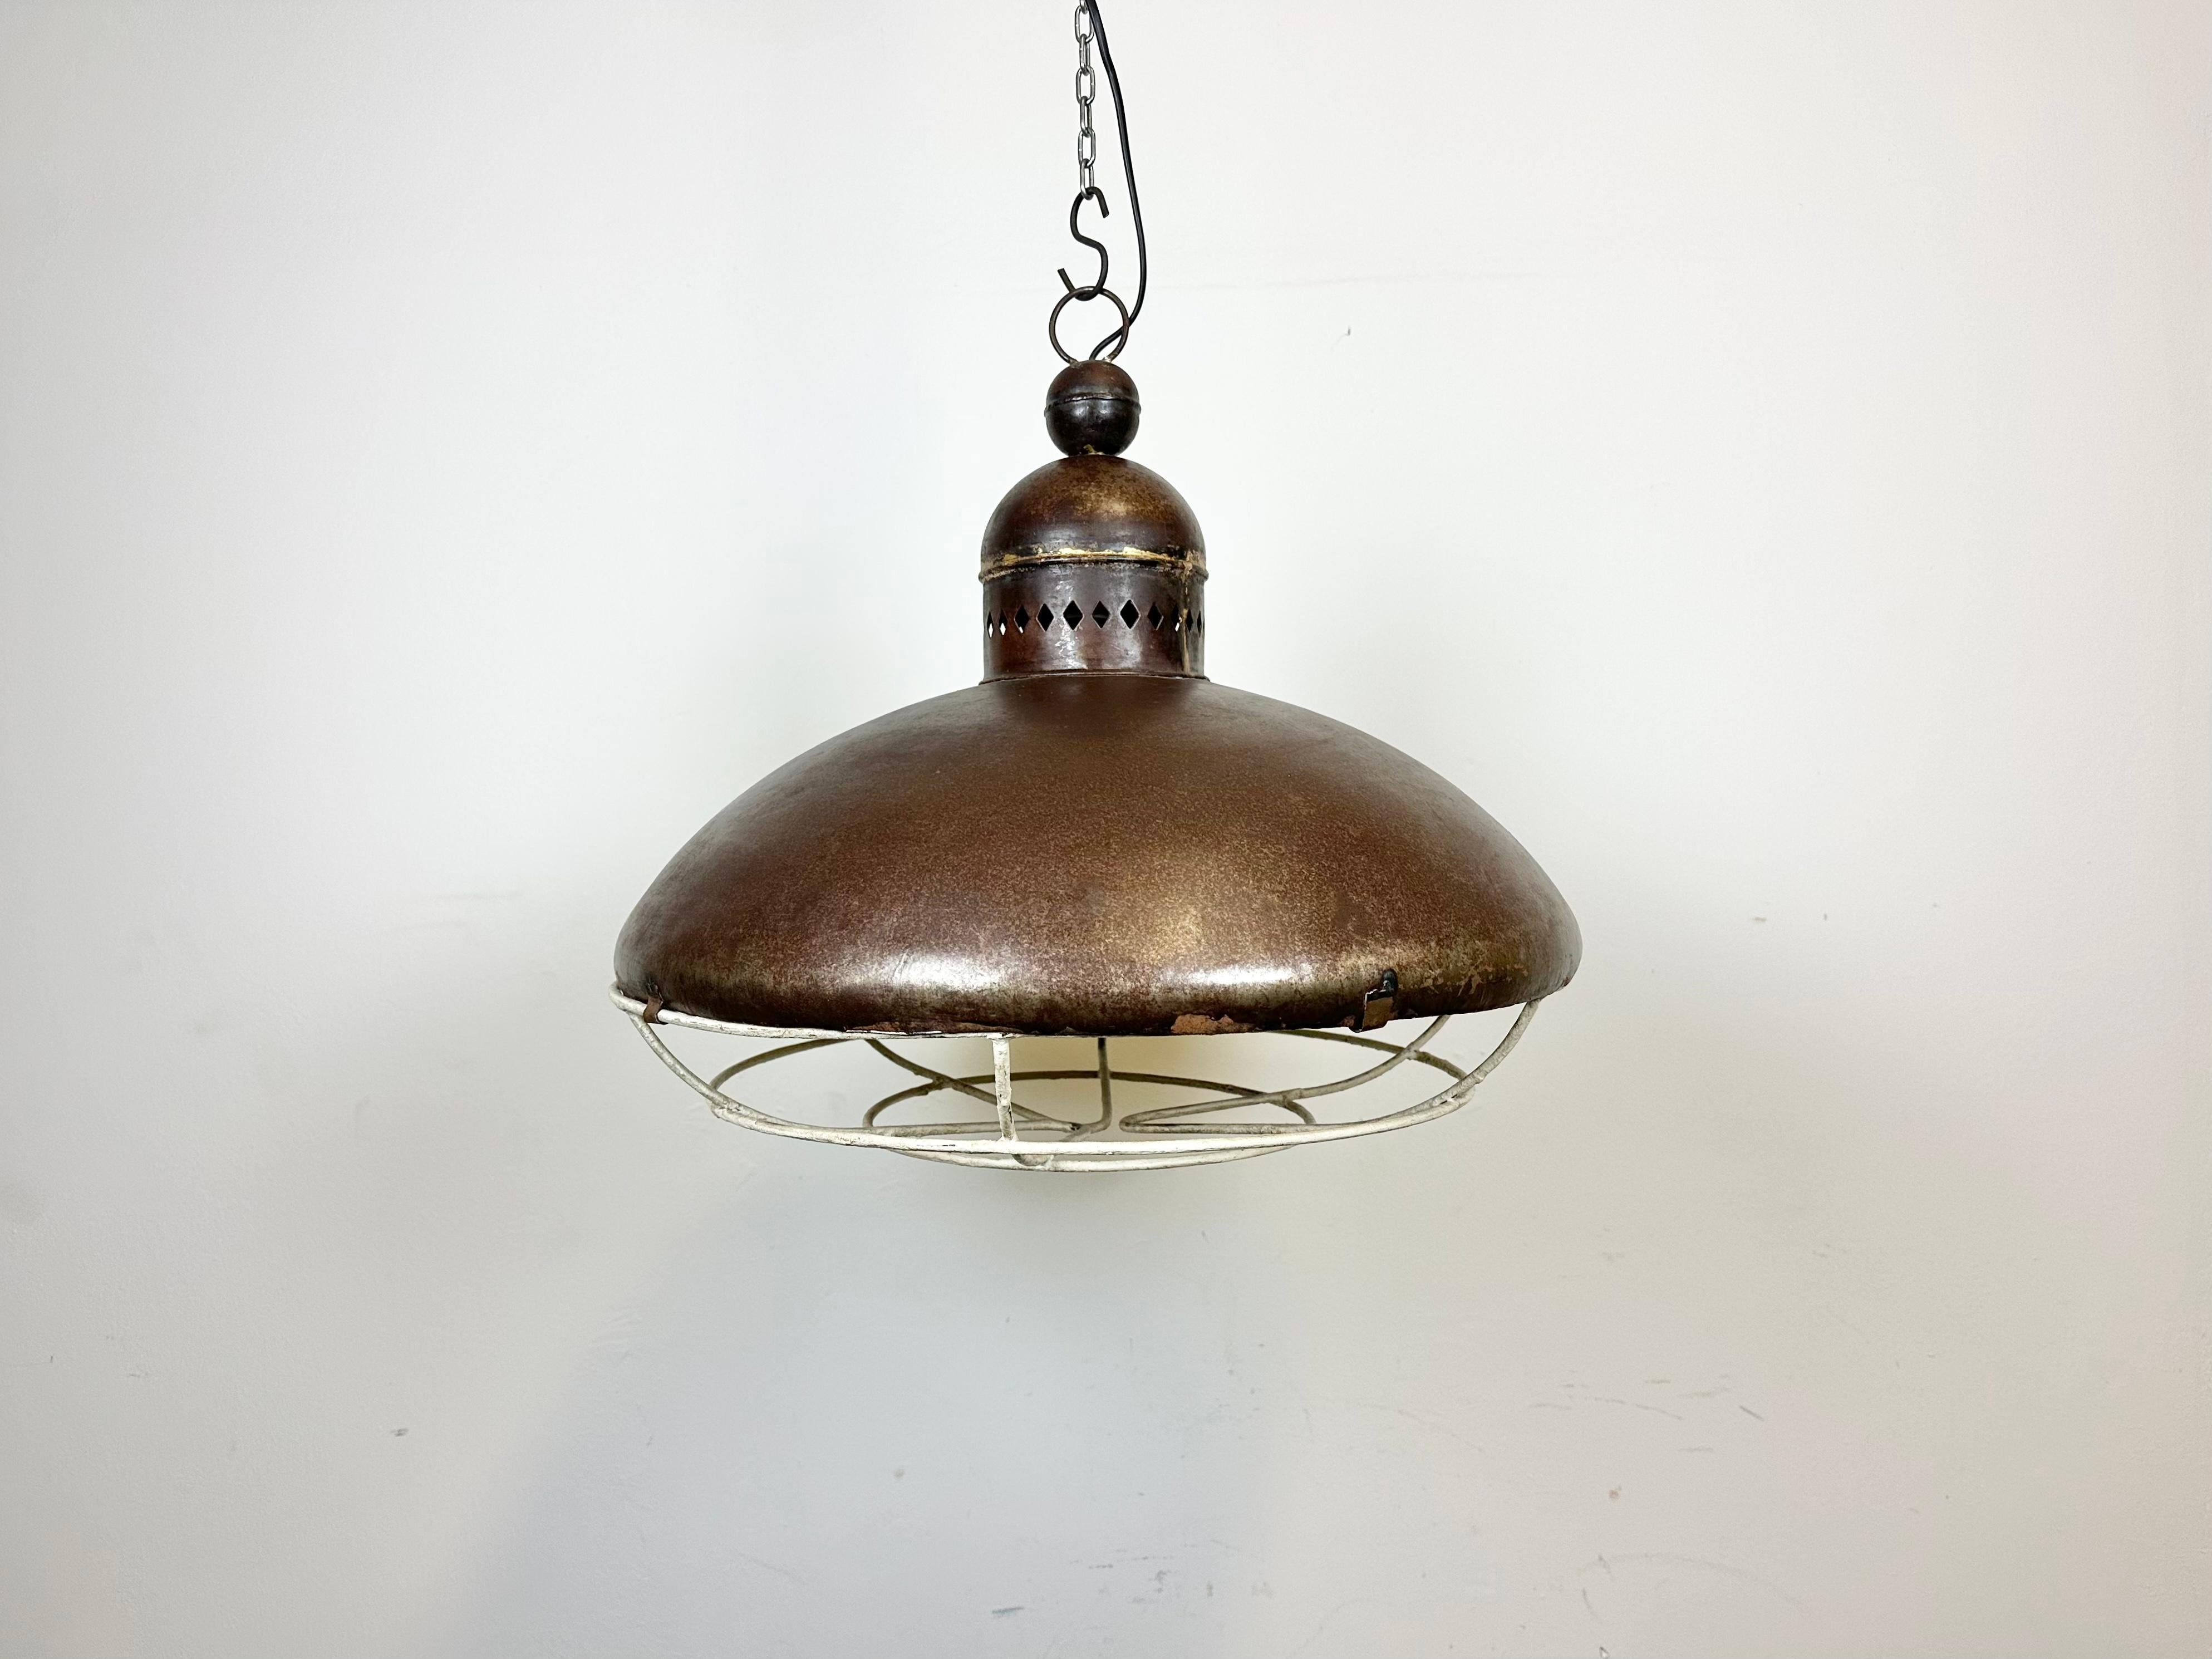 Industrial metal light with iron grid made in Sweden during the 1960s. New wire. The socket requires E 27/ E 26 light bulbs. The diameter of the shade is 53 cm. The weight of the lamp is 1 kg.